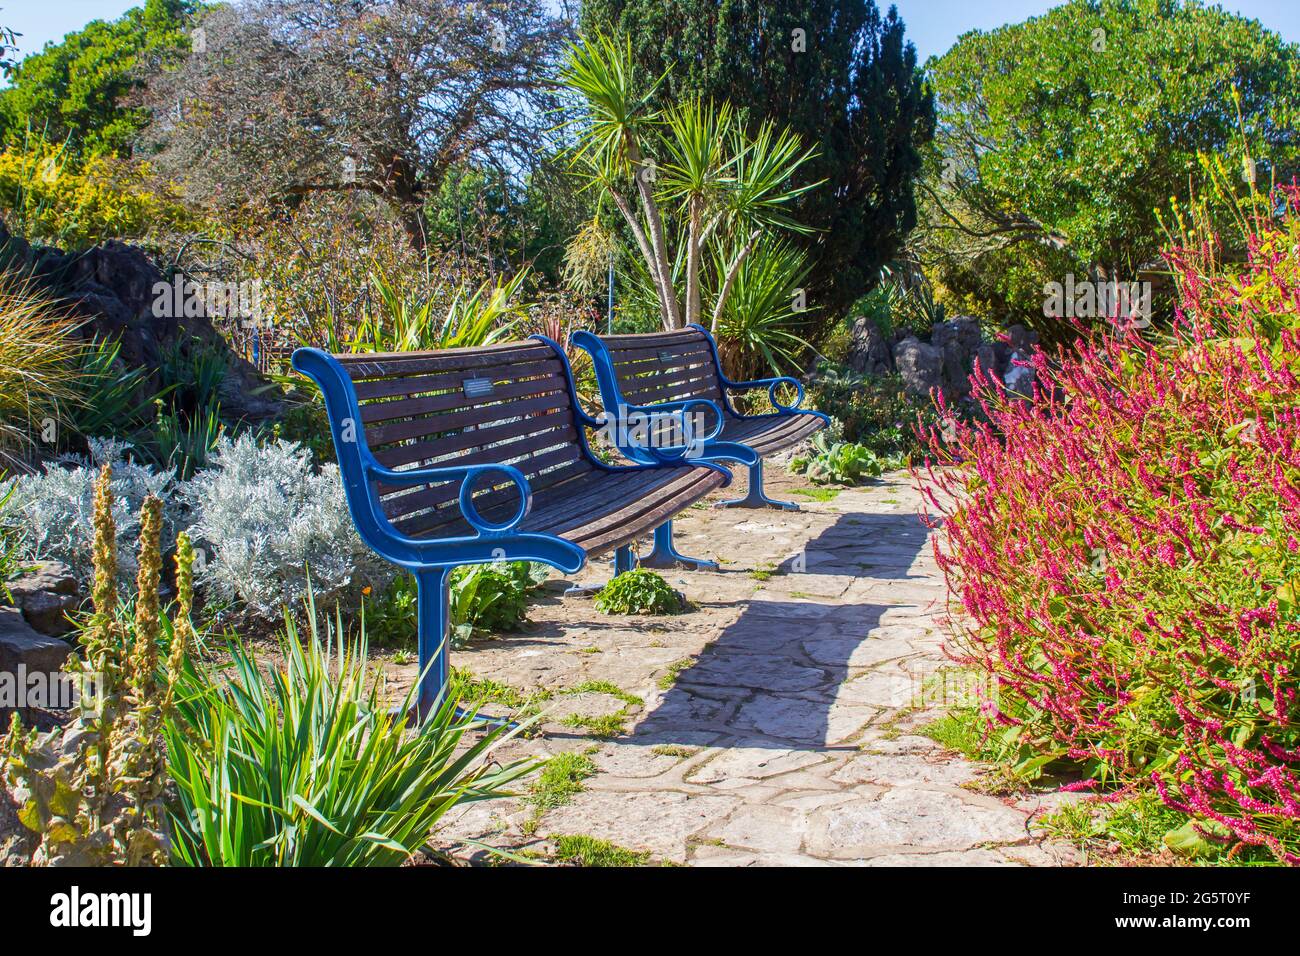 18 September 2019 Garden Seats located in the Portsmouth Rock Garden, Southsea England on an hot early autumn day in Septembercrazy paving Stock Photo